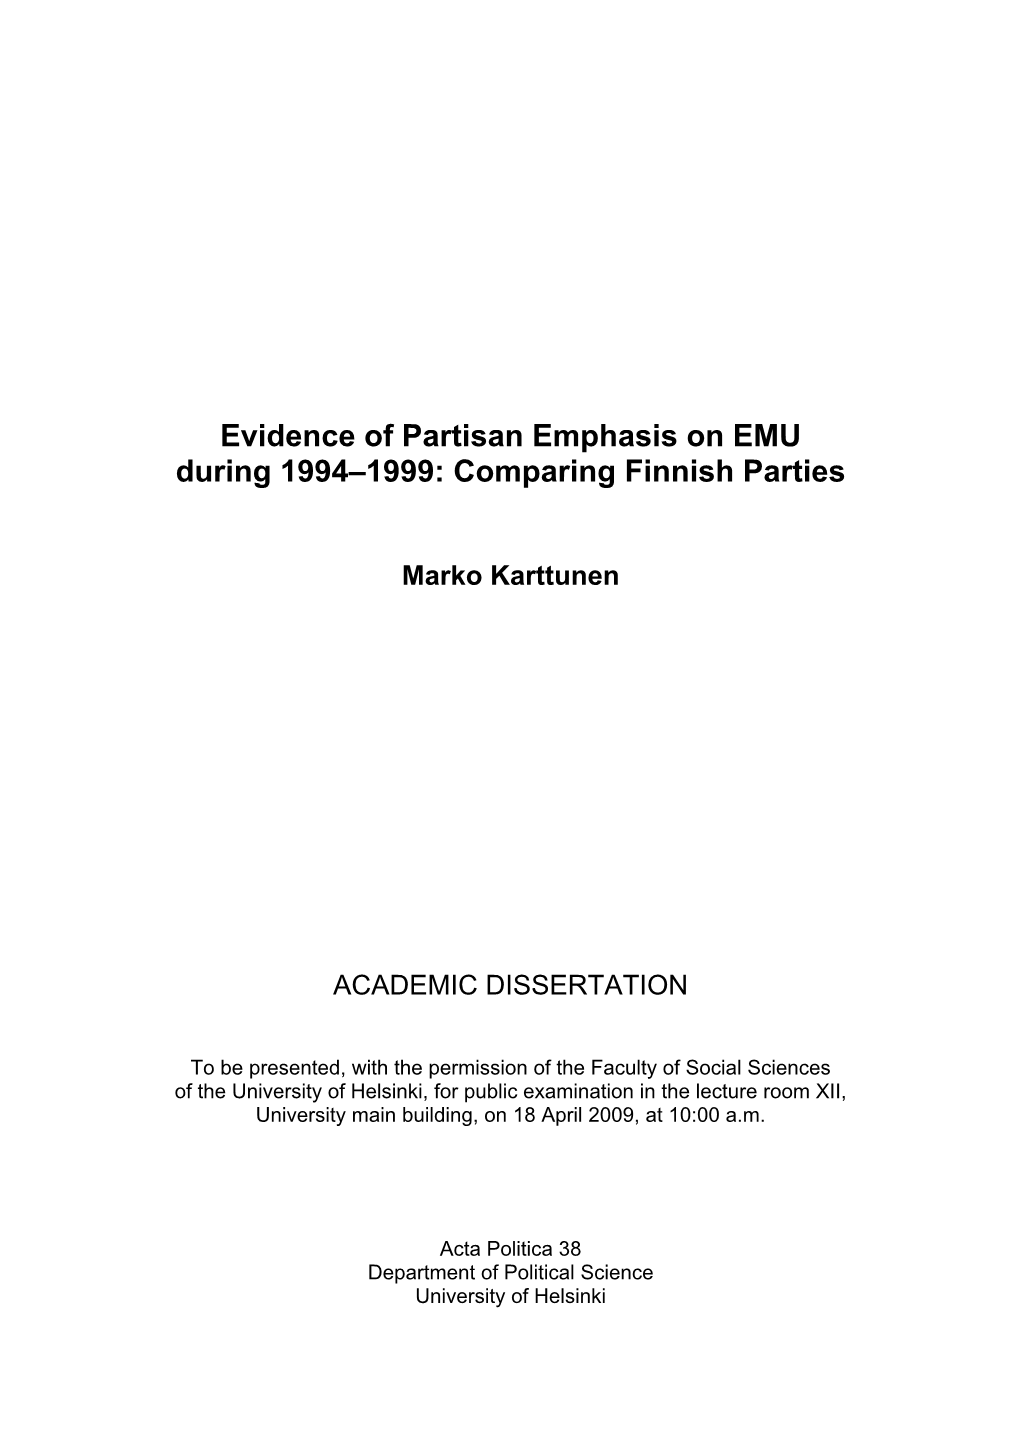 Evidence of Partisan Emphasis on EMU During 1994–1999: Comparing Finnish Parties